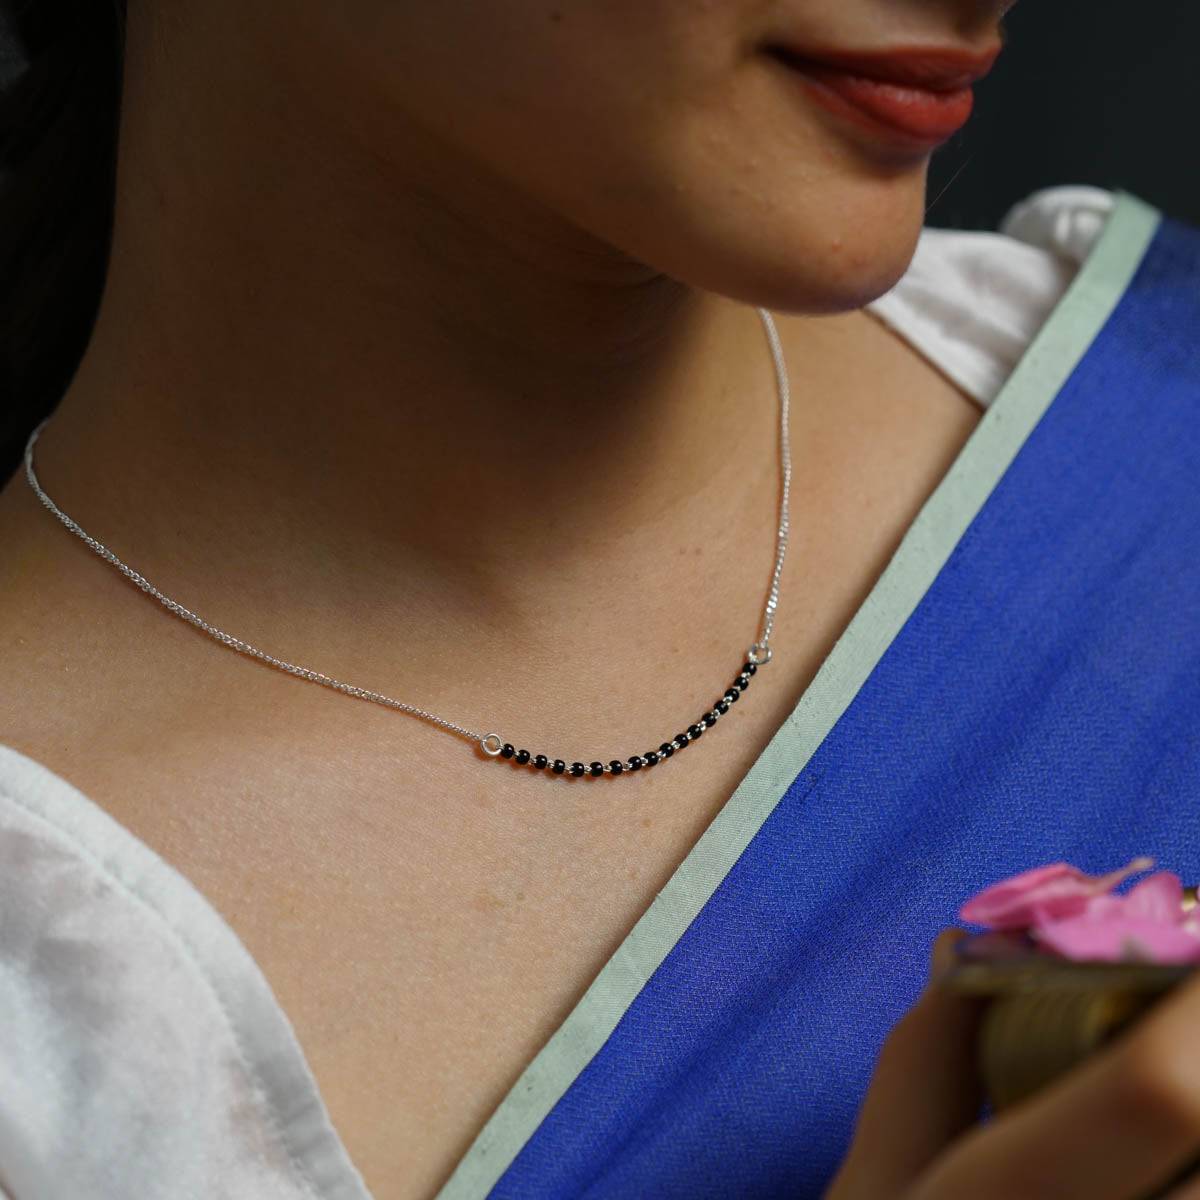 Buy online Long Silver Necklace with Big Chandrakor Pendant Filled